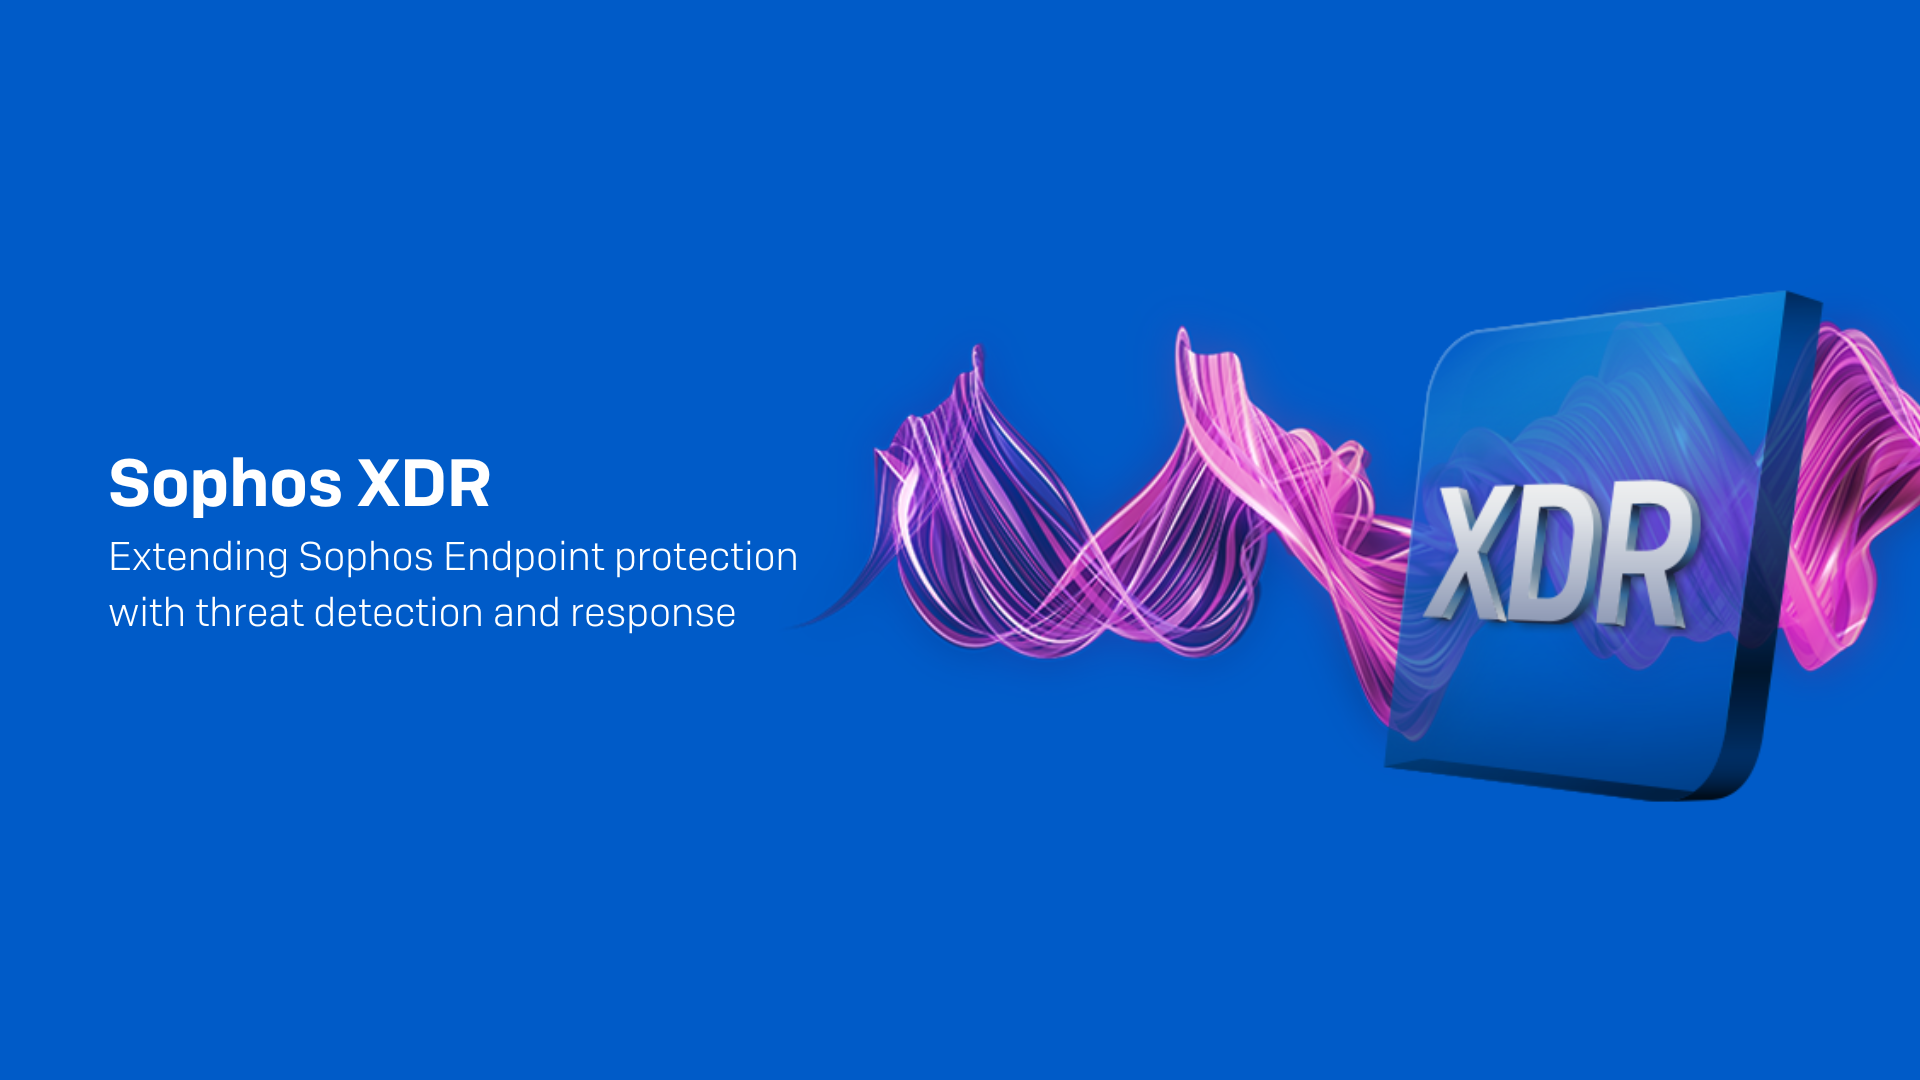 Sophos XDR: Extending Sophos Endpoint protection with threat detection
and response